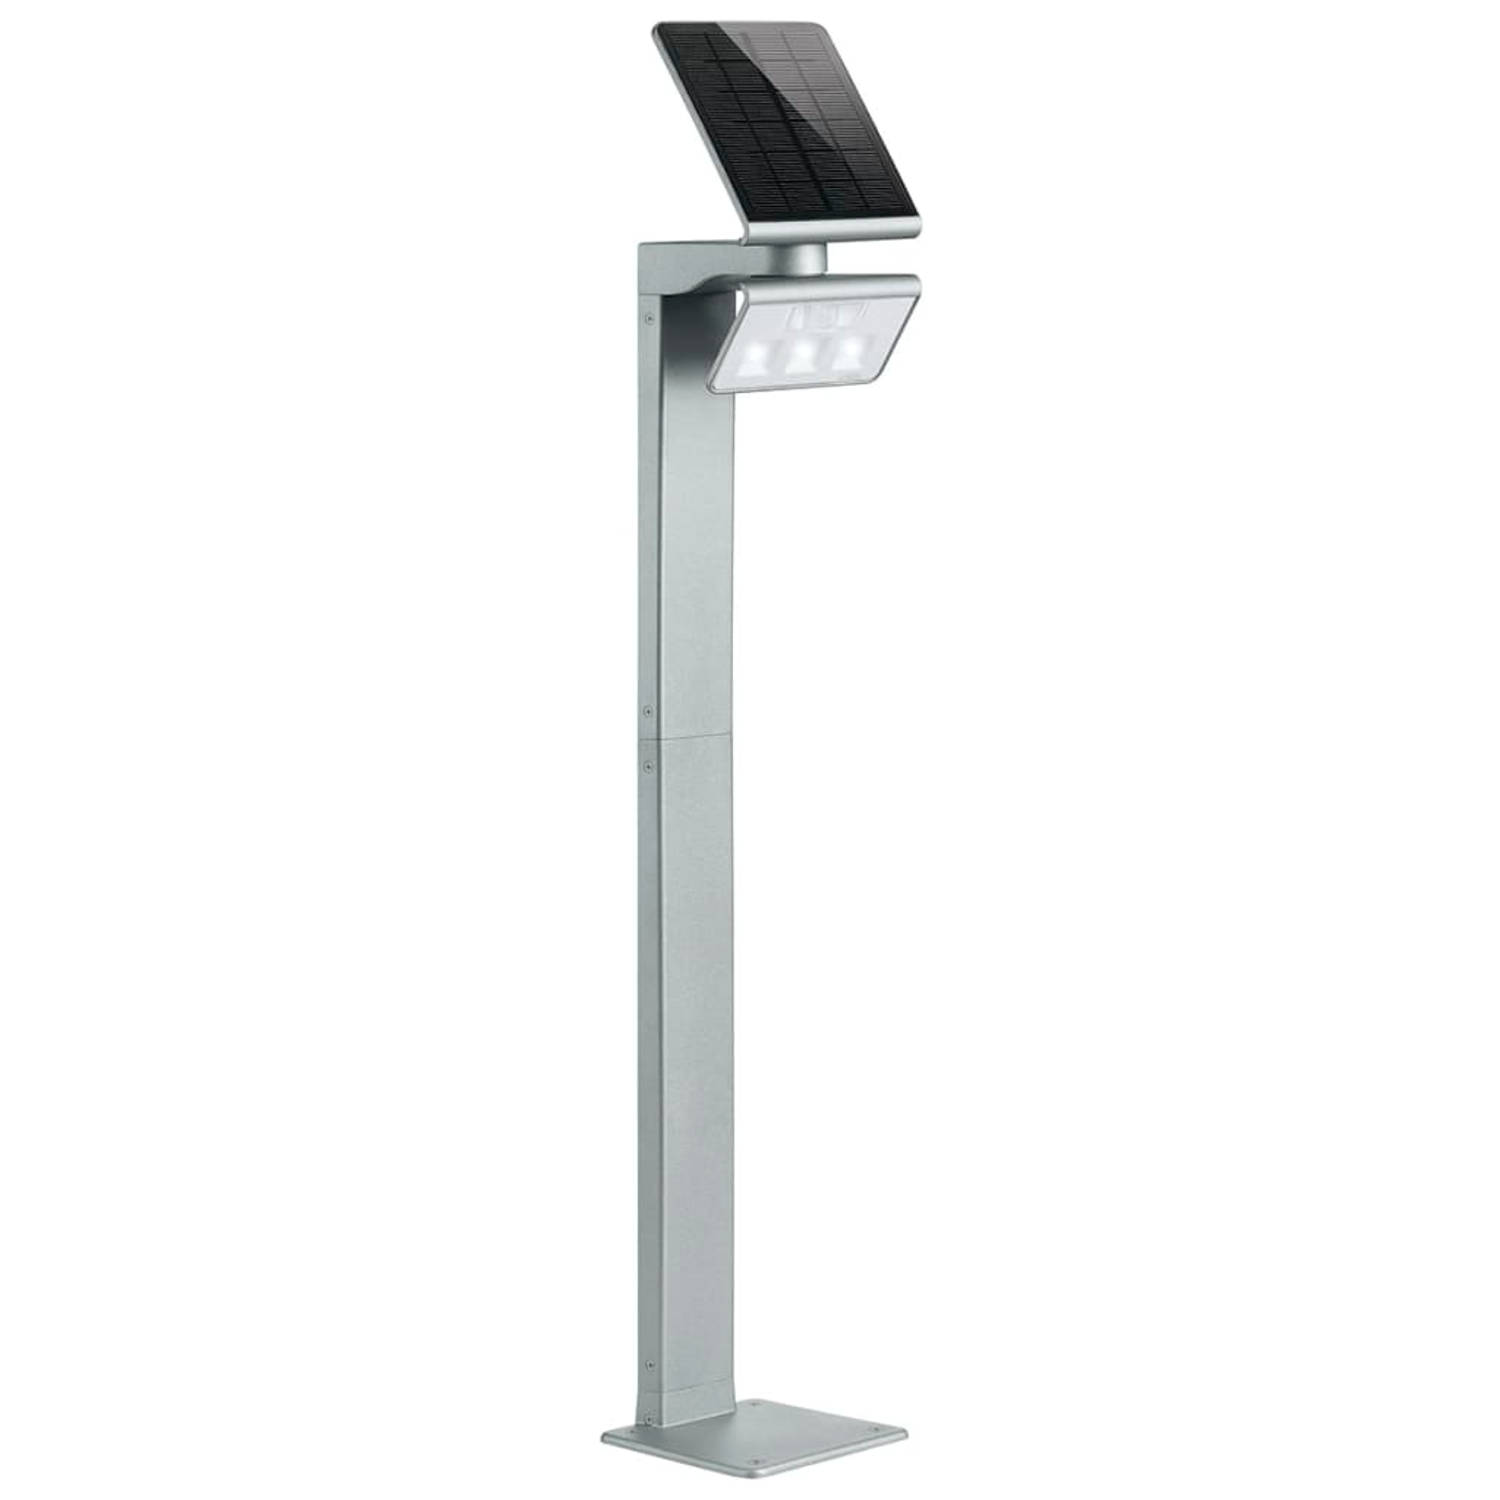 LED-solarlamp XSolar Stand, zilver